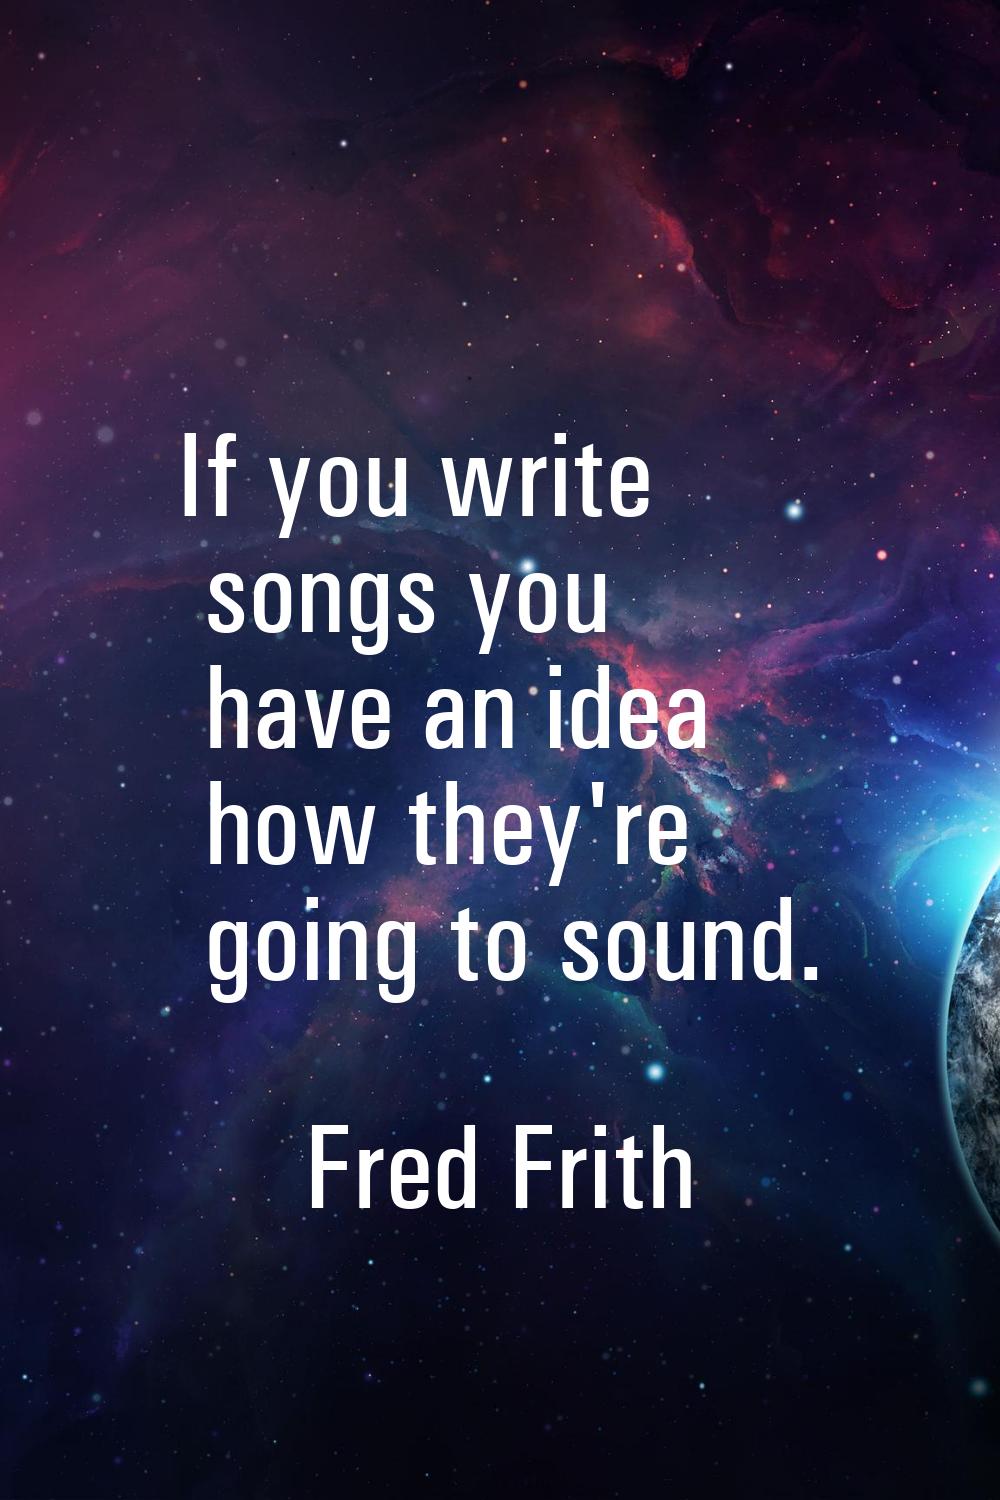 If you write songs you have an idea how they're going to sound.